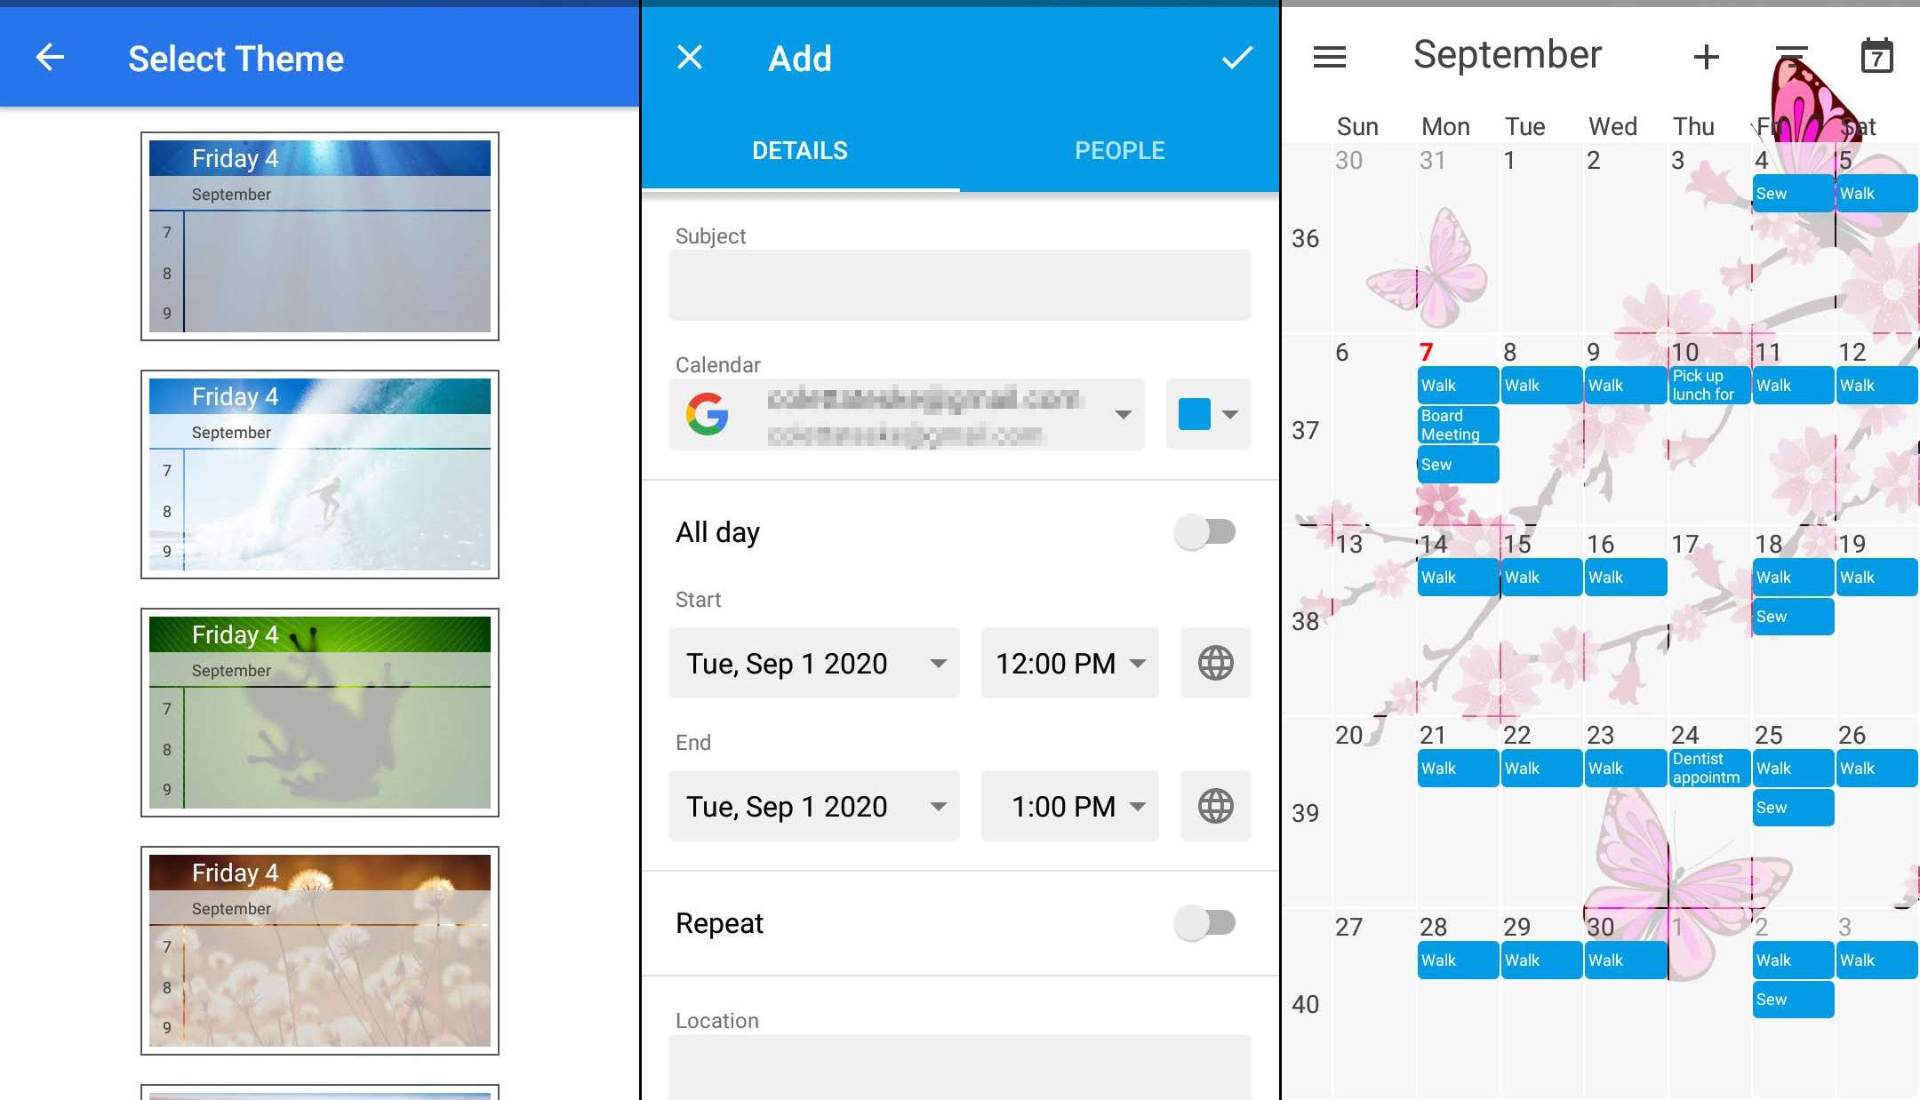 How To Download A Calendar App And Optimize Schedules